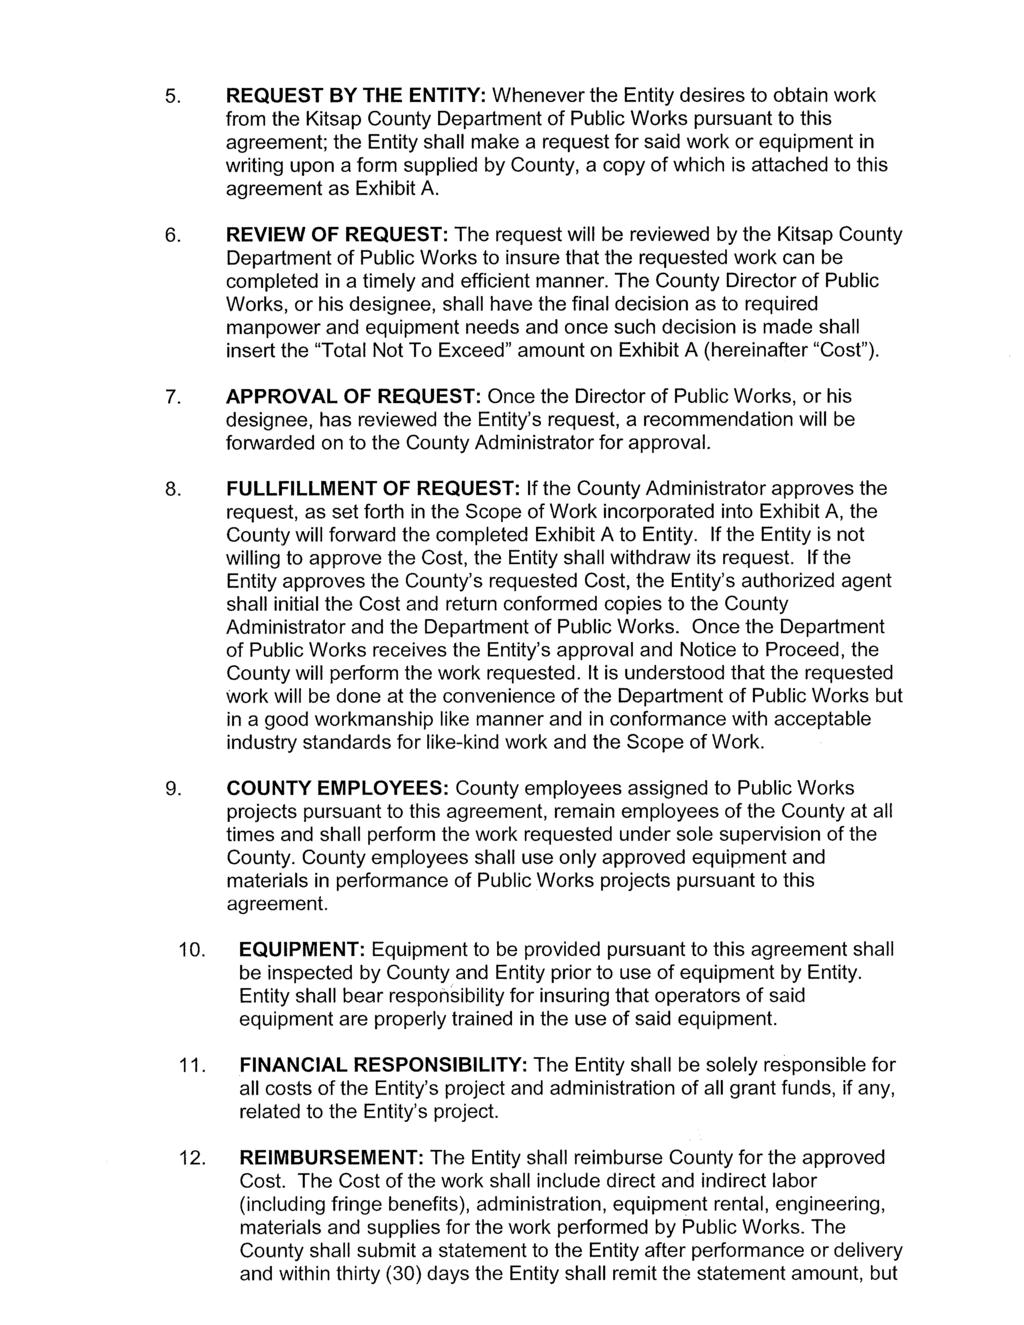 5. REQUEST BY THE ENTITY: Whenever the Entity desires to obtain work from the Kitsap County Department of Public Works pursuant to this agreement; the Entity shall make a request for said work or